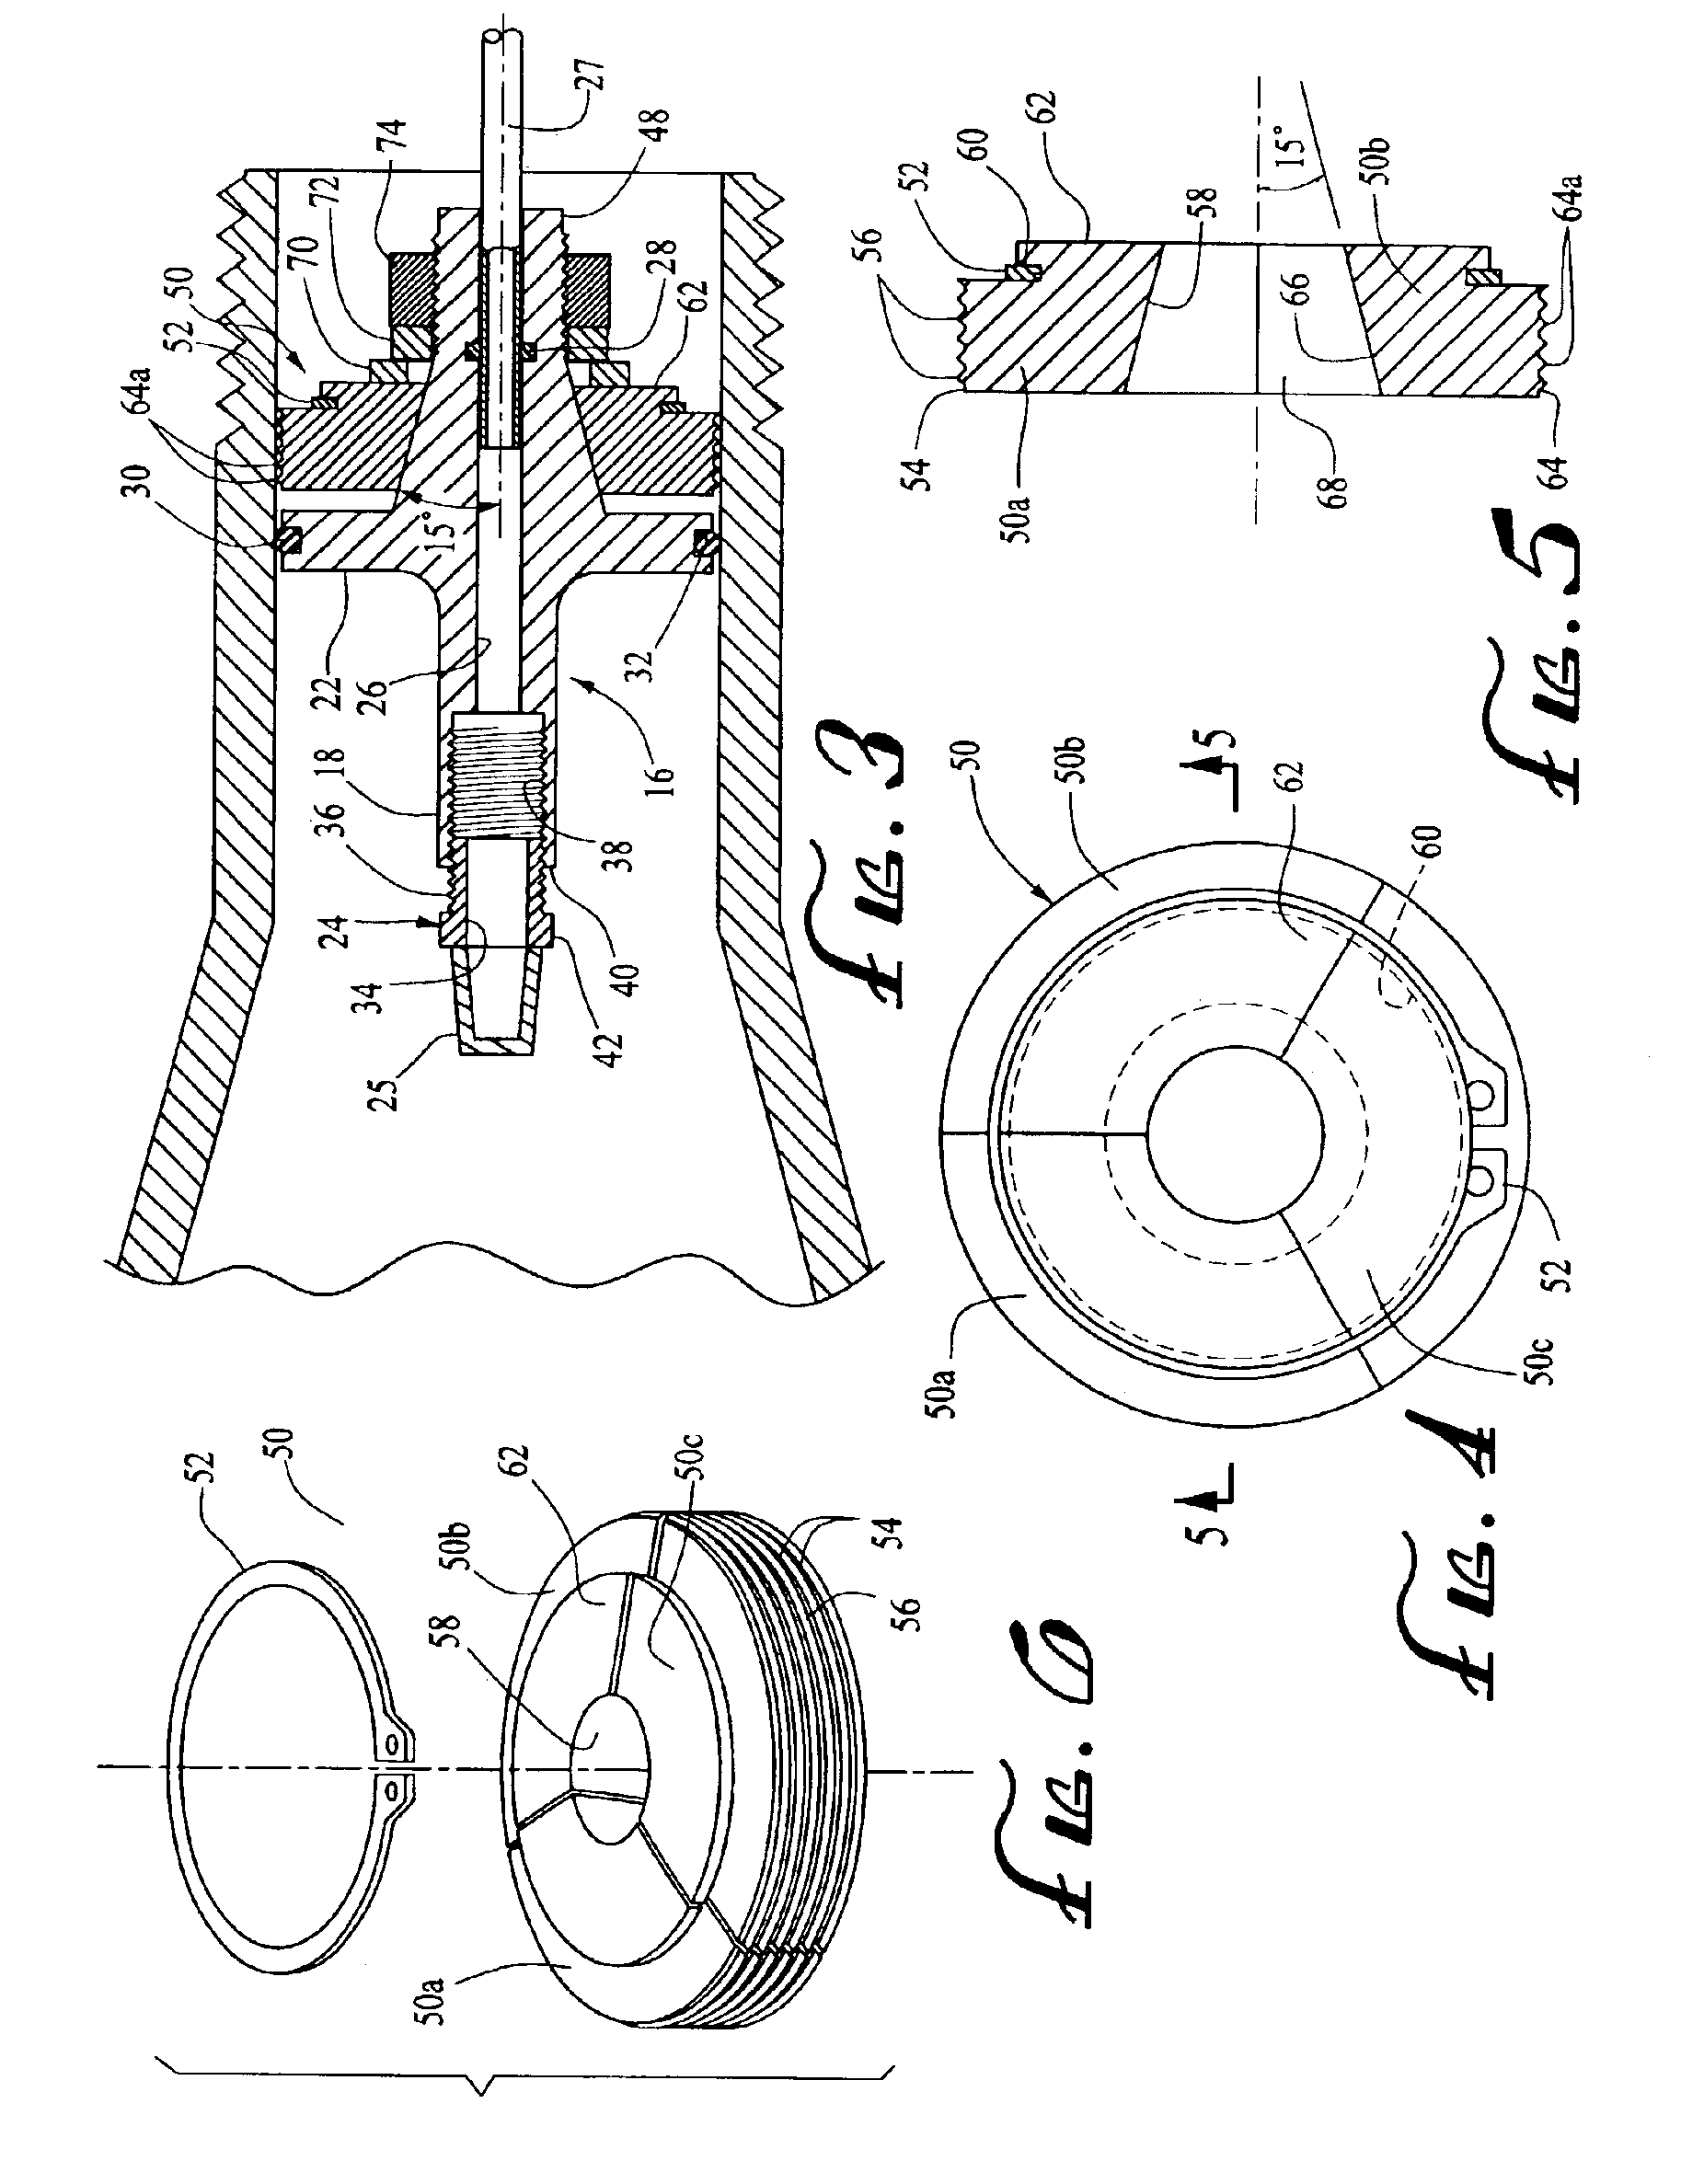 Expandable spindle plug assembly for use with automatic tire inflation systems